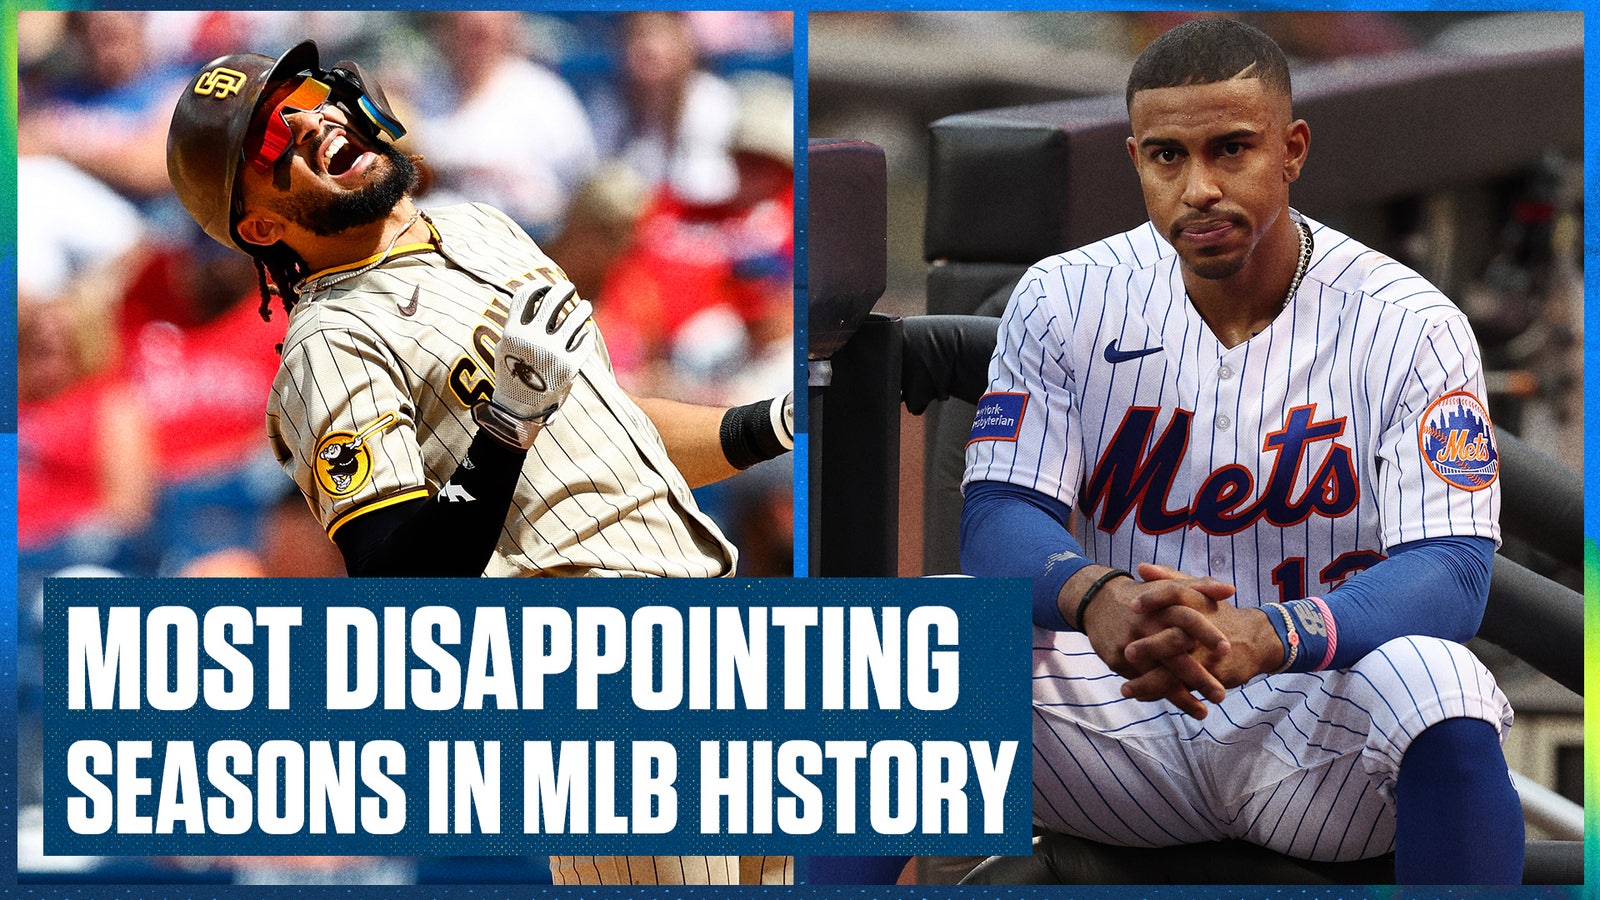 San Diego Padres, New York Mets are mired in two of the most disappointing seasons in MLB history